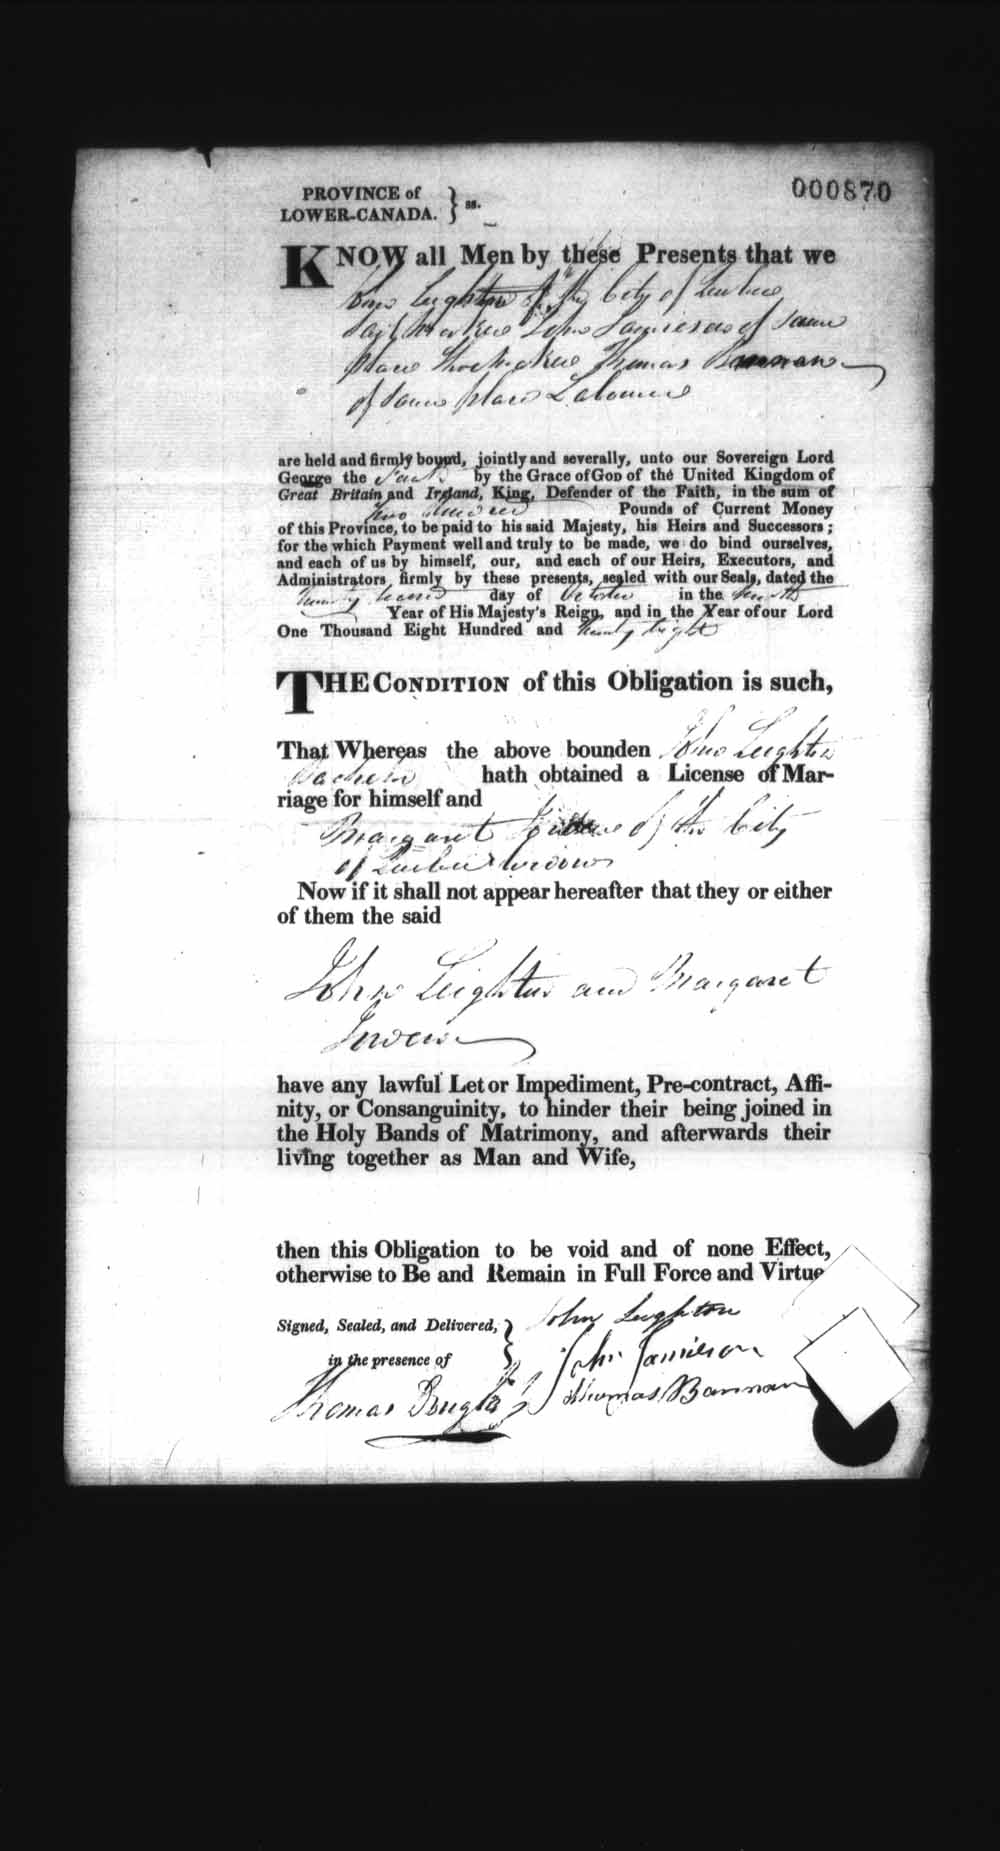 Digitized page of Upper and Lower Canada Marriage Bonds (1779-1865) for Image No.: e008236960